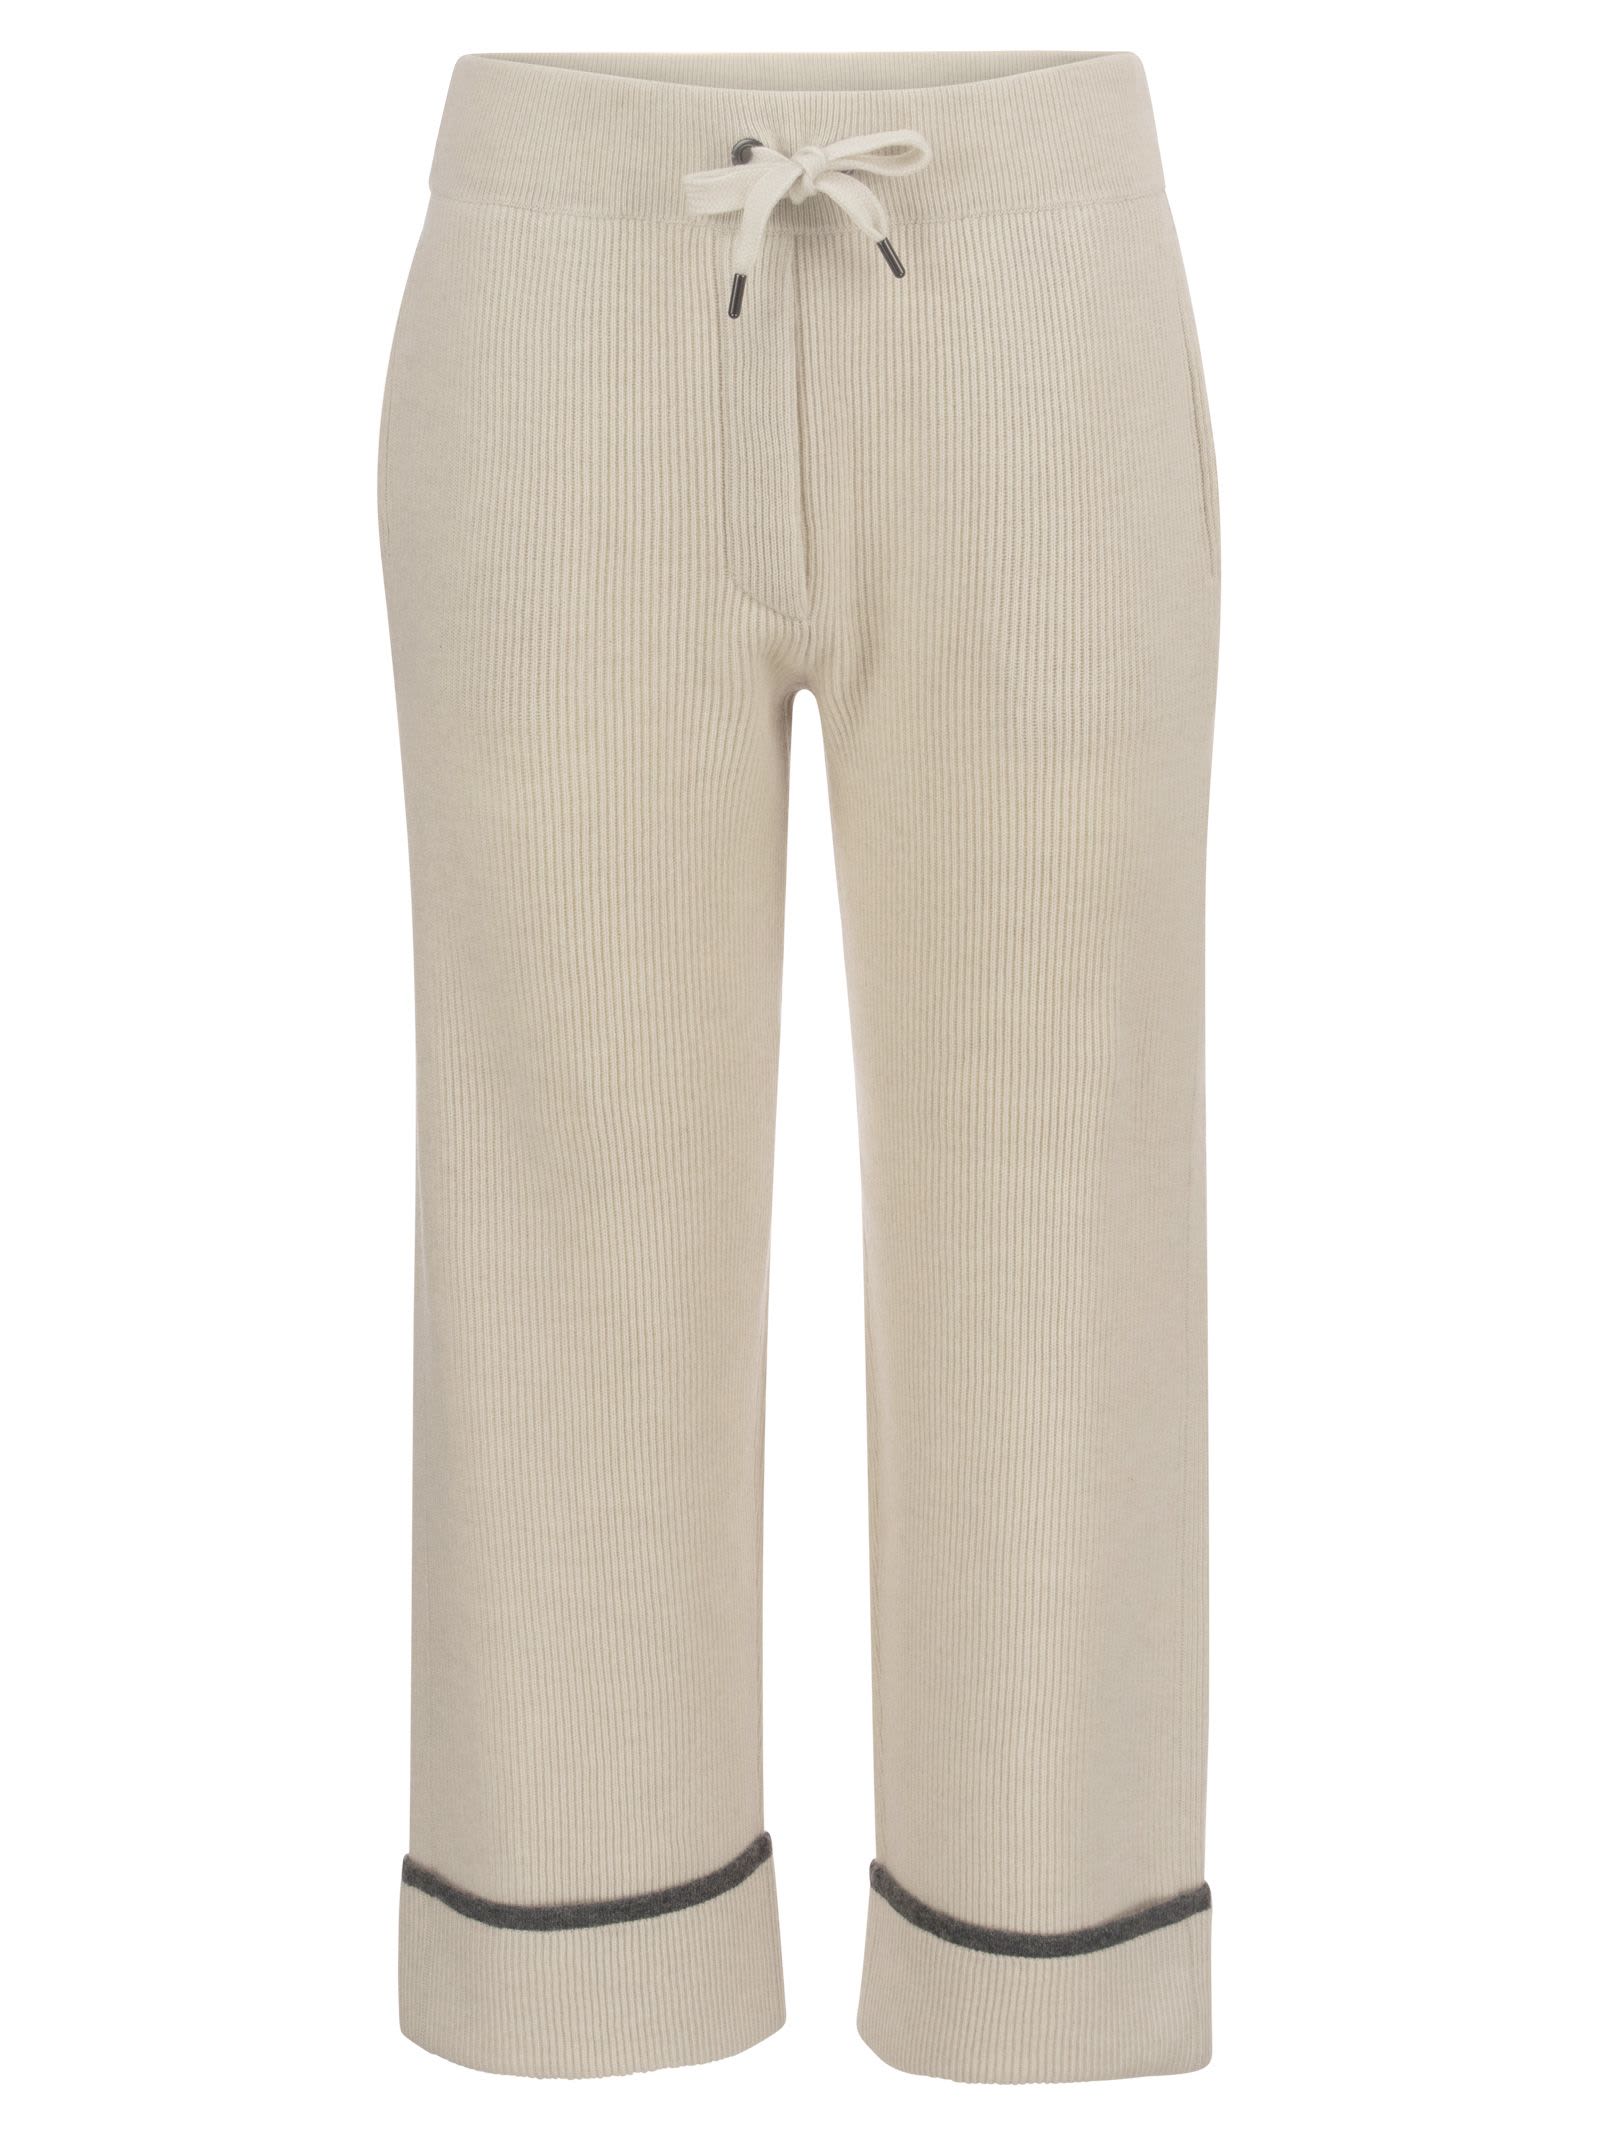 Brunello Cucinelli English Rib Cashmere Knit Trousers With Contrasting Hems